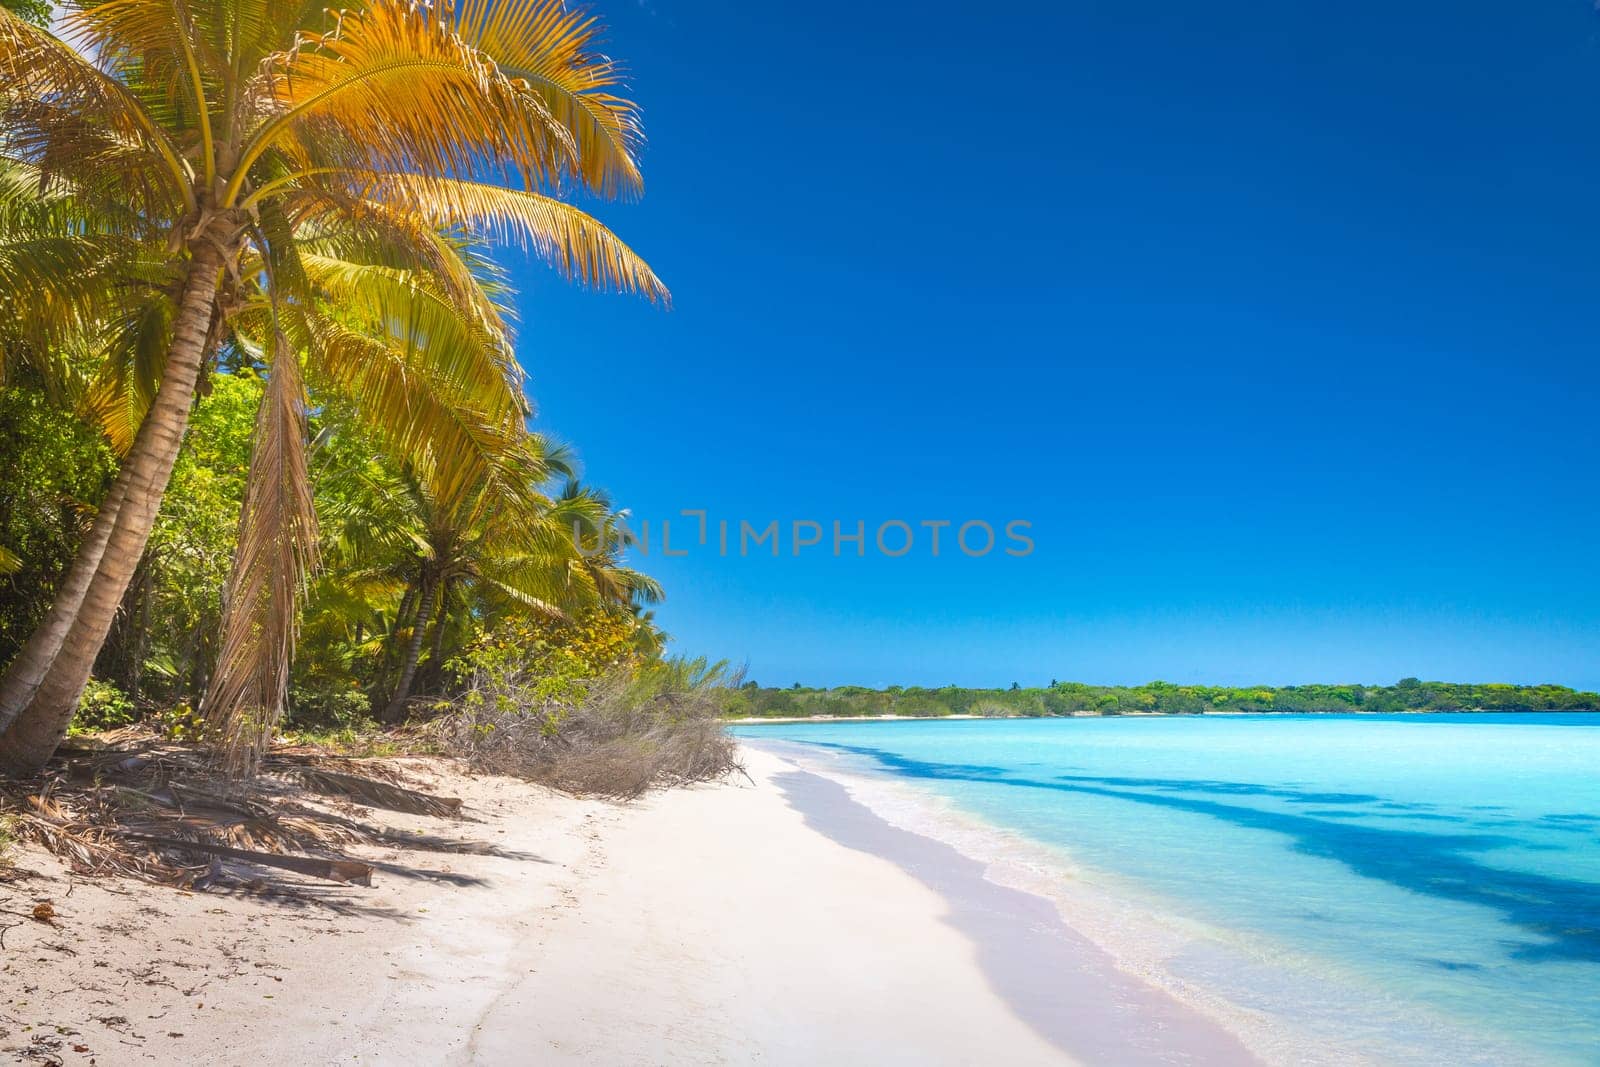 palm trees against blue sky and beautiful beach in Punta Cana at sunny day, Dominican Republic.